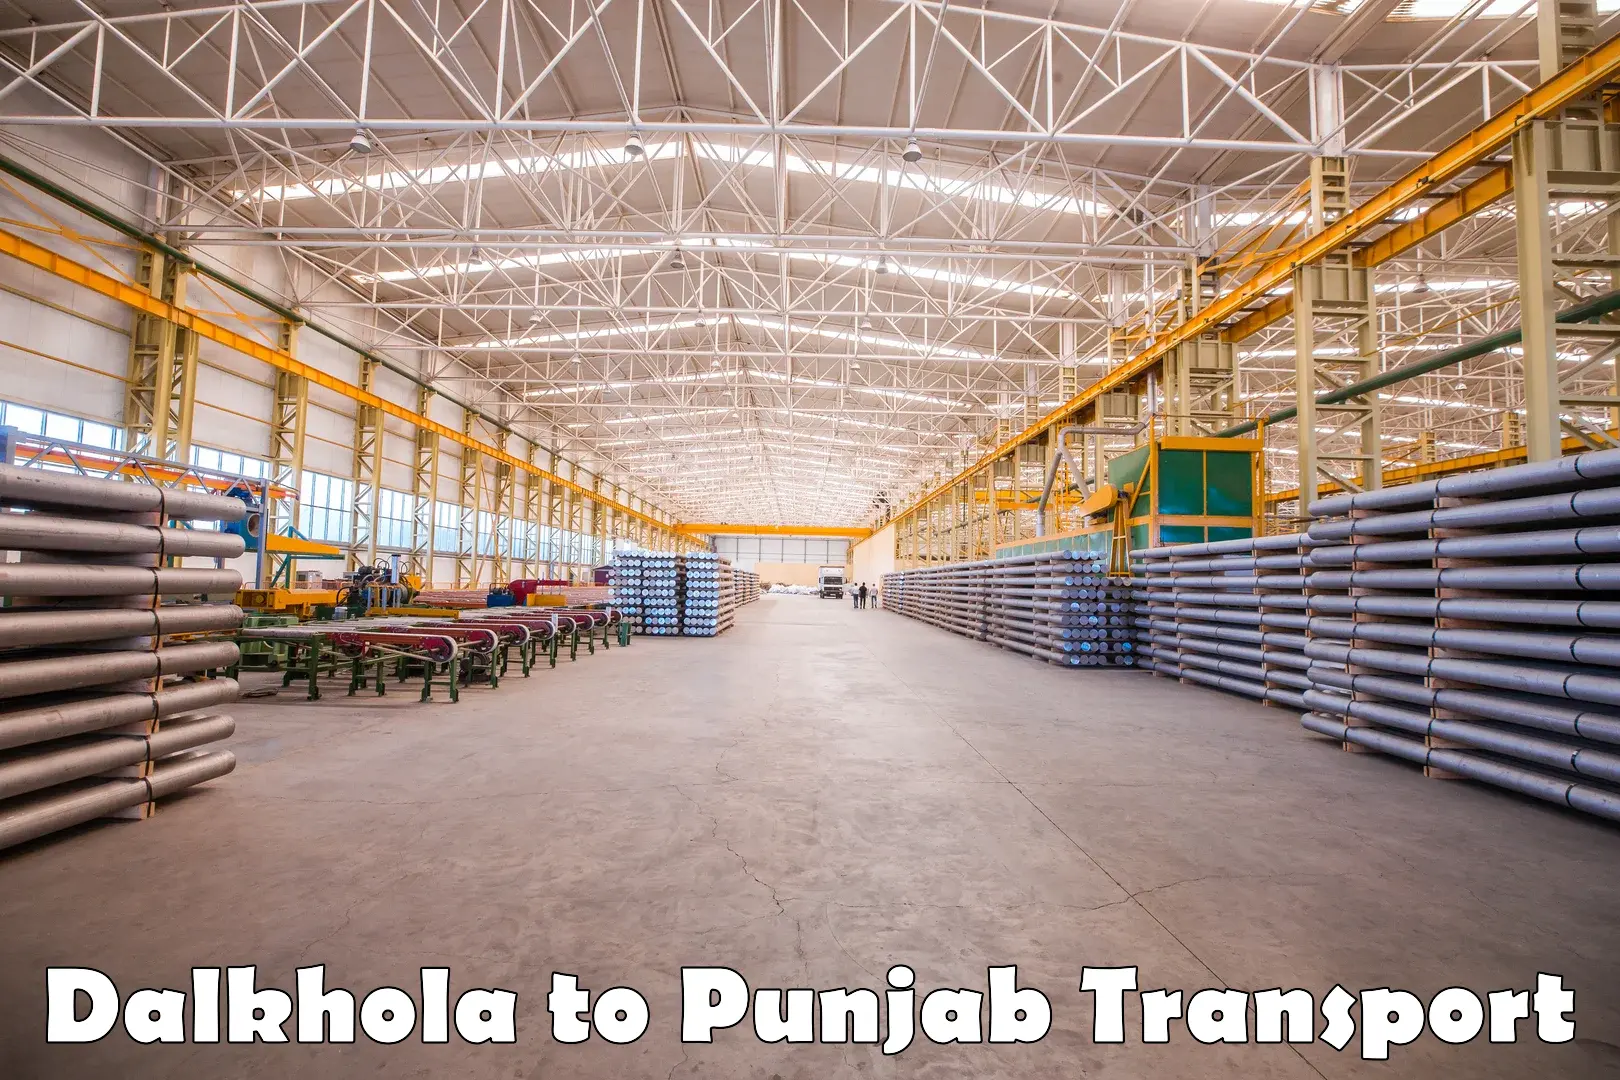 Truck transport companies in India Dalkhola to Goindwal Sahib